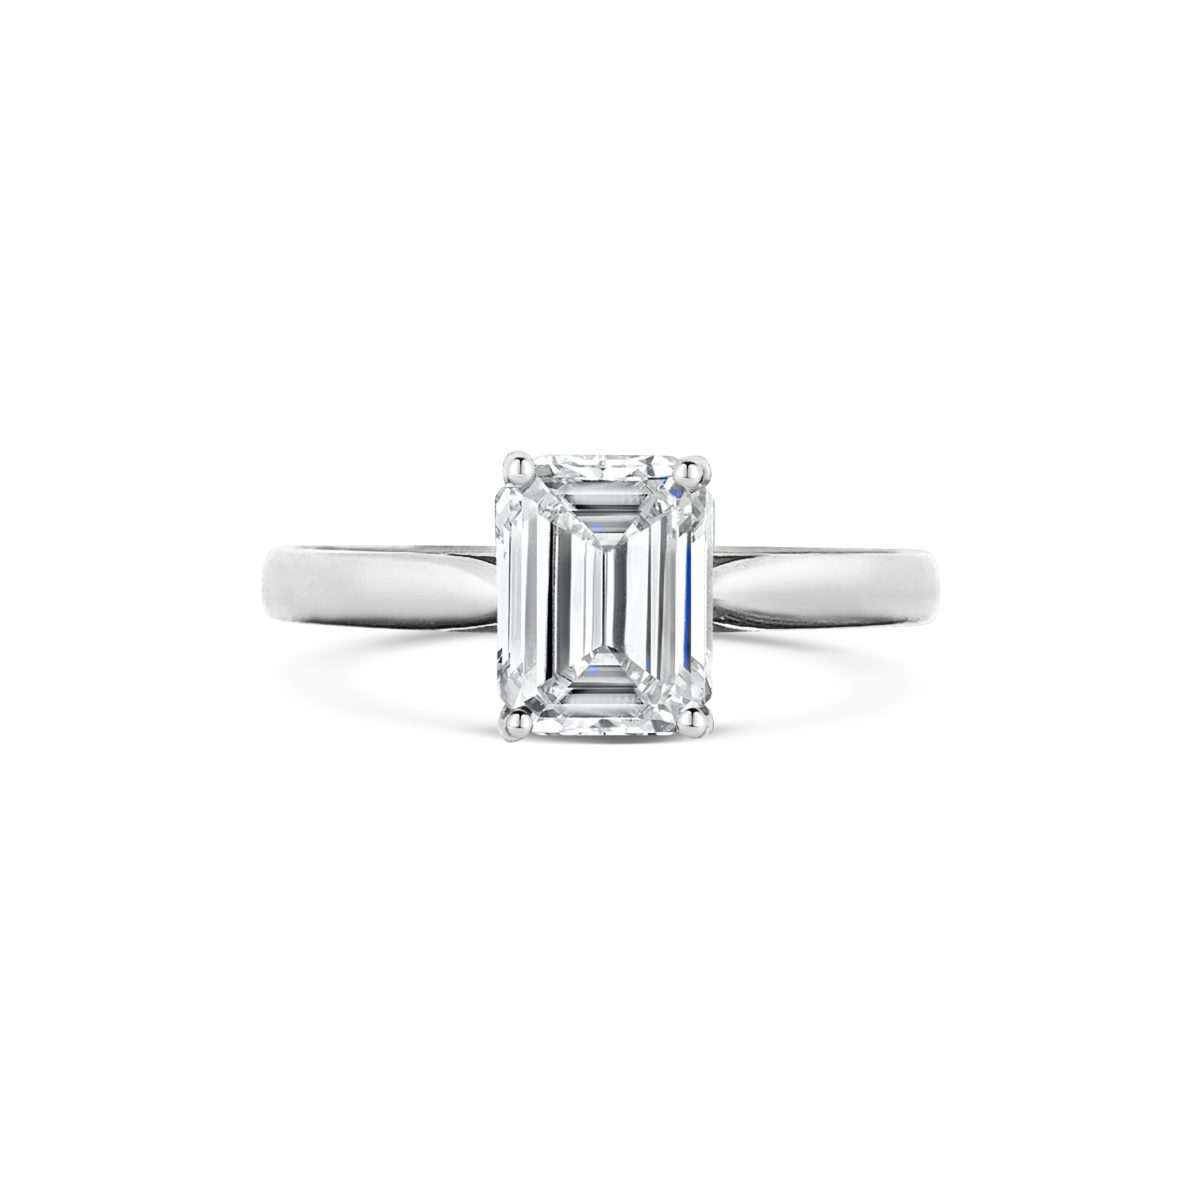 Emele Emerald Solitaire Diamond Engagement Ring Front View